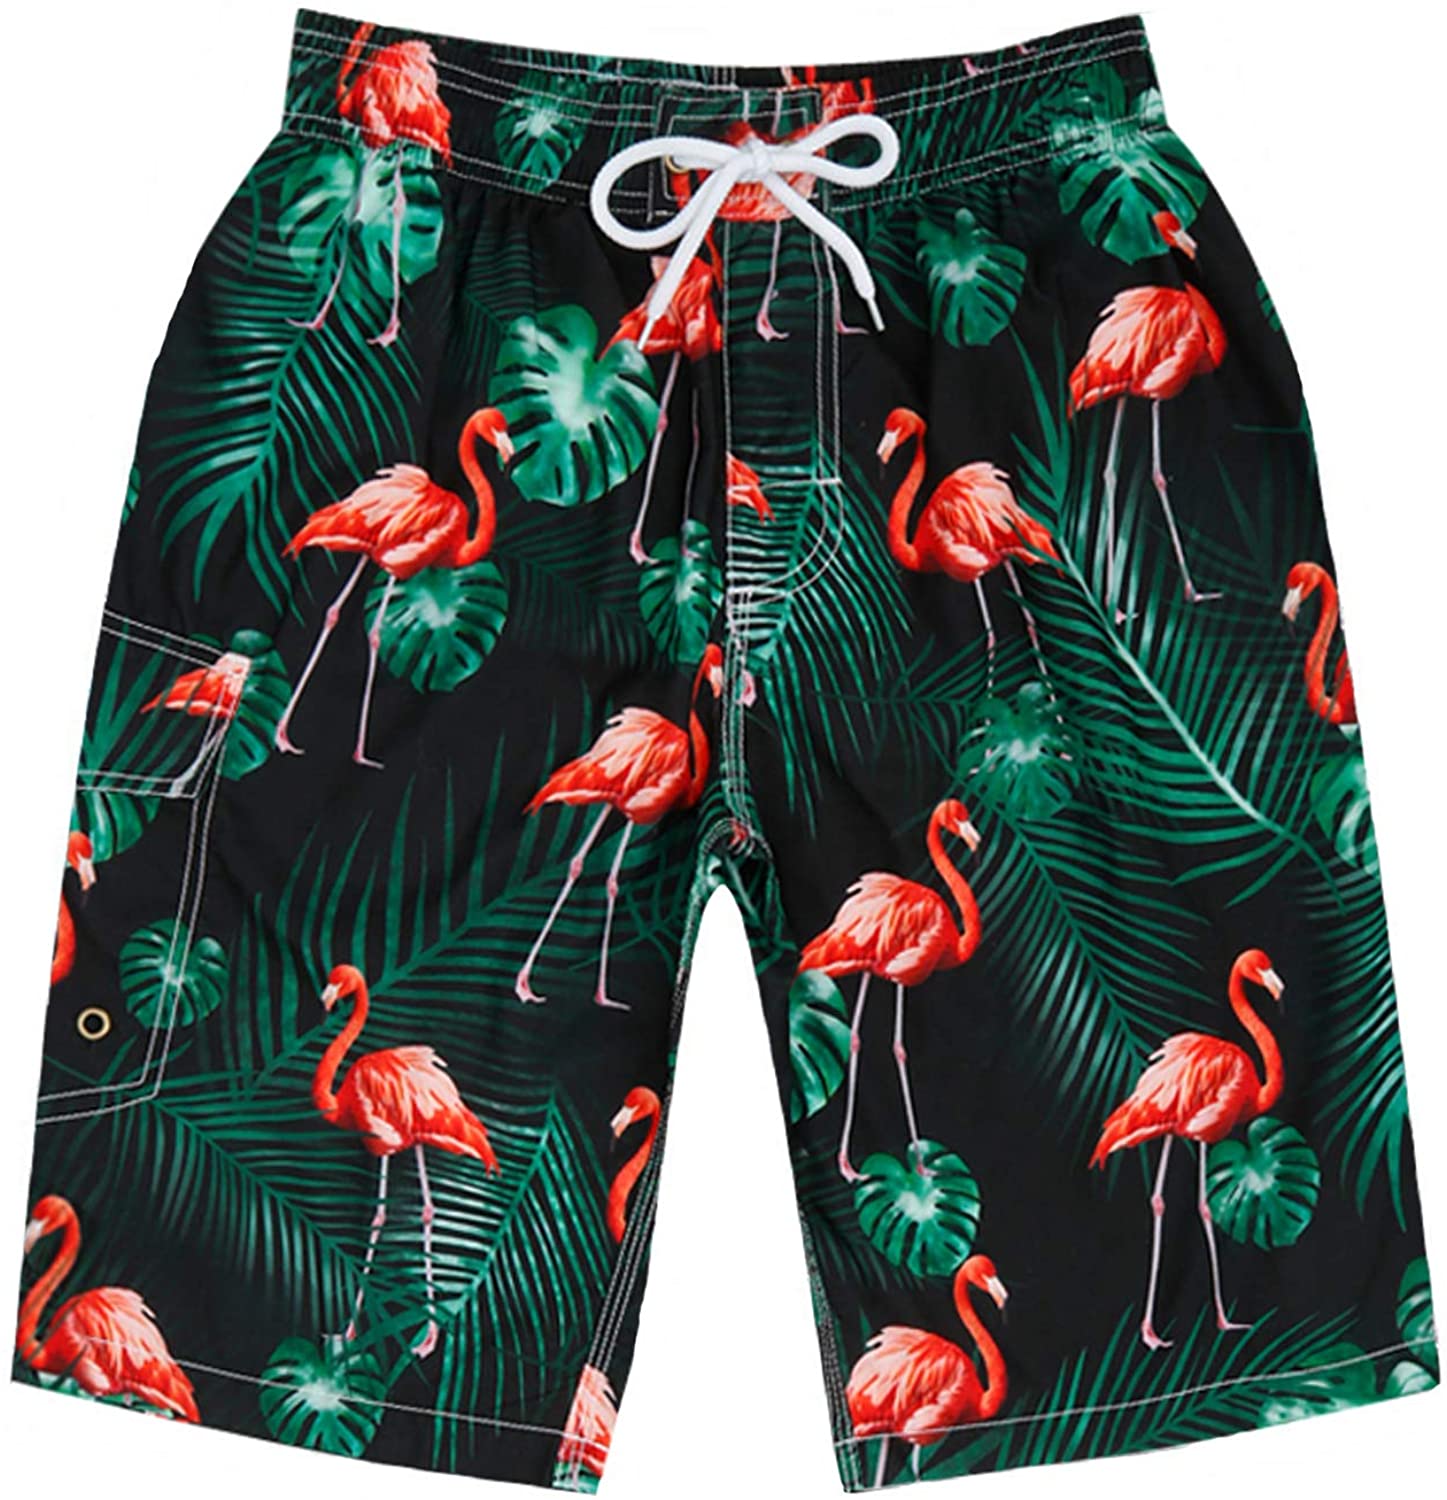 Quick Dry Beach Board Shorts for Men Novelty Pineapple Tropical